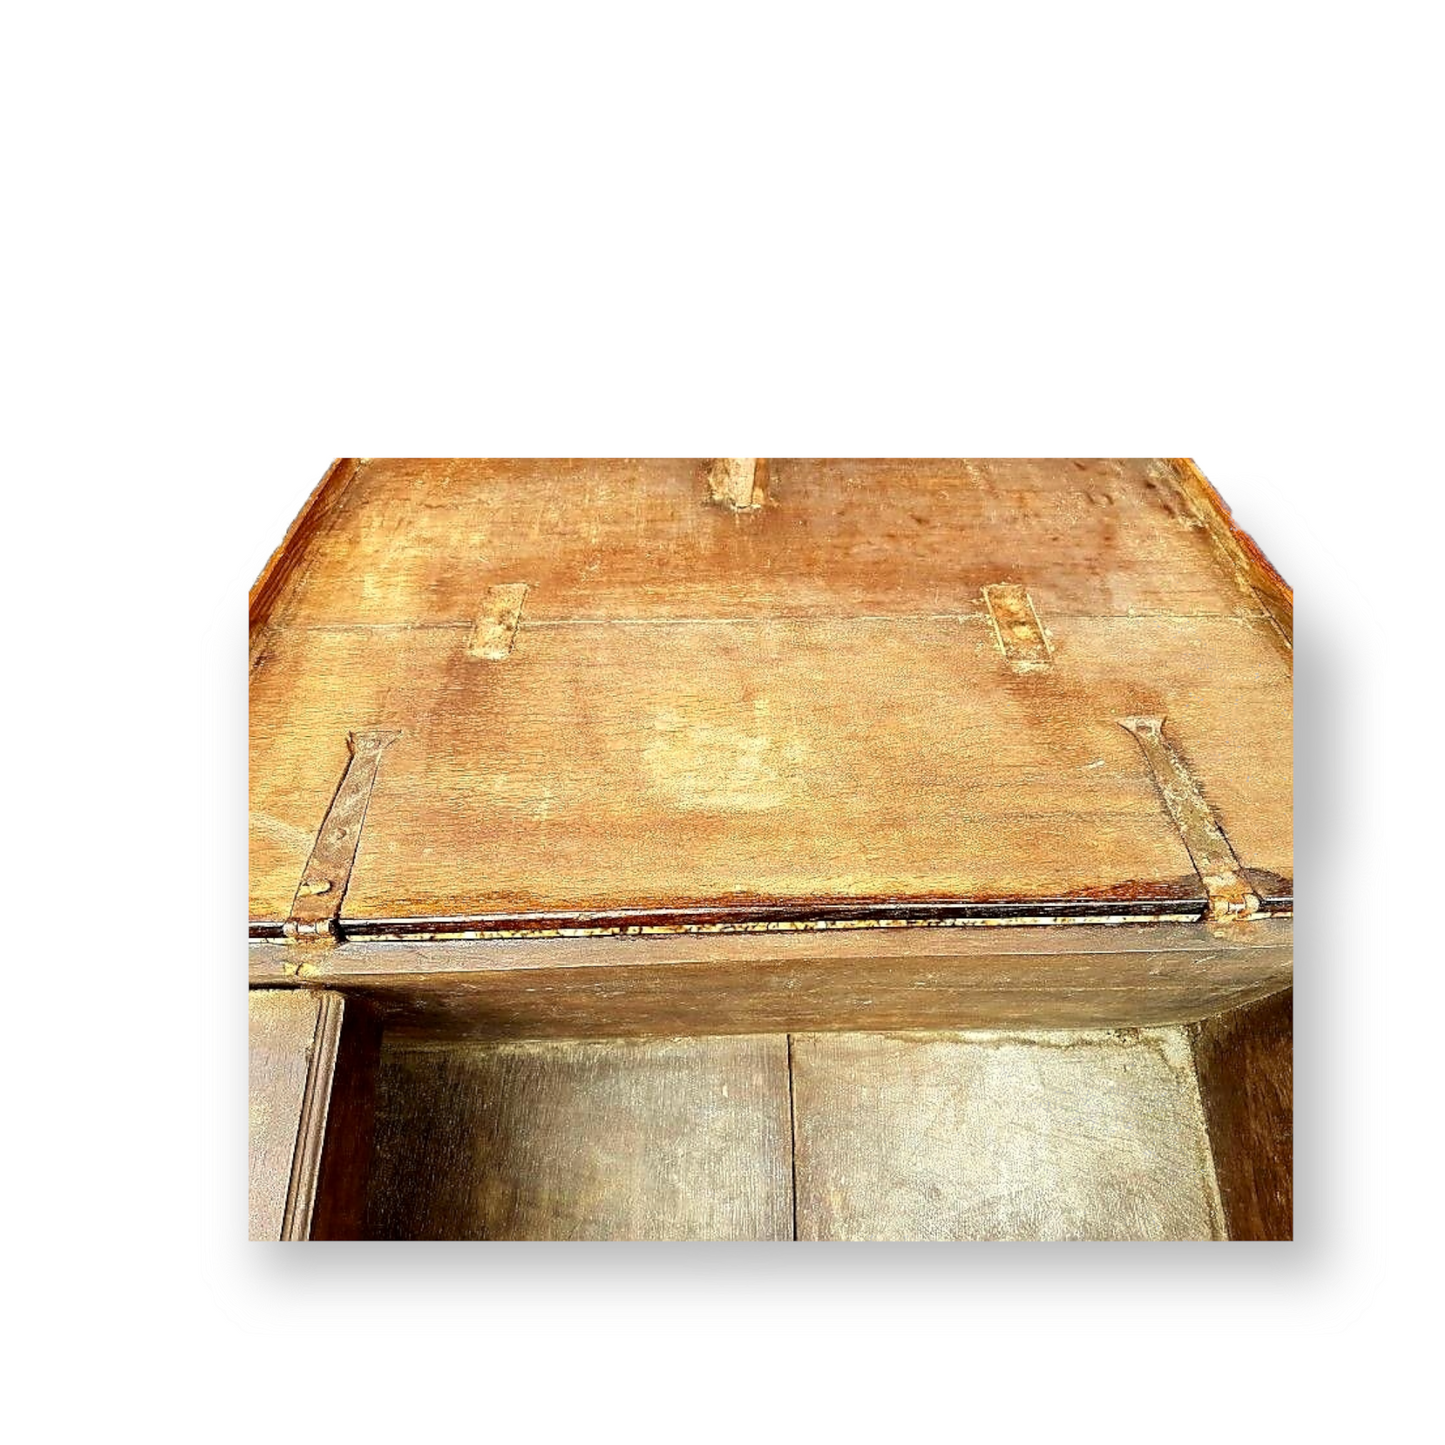 Early 17th Century English Antique Oak Boarded Box or Bible Box on an Associated Oak Stand of Later Date